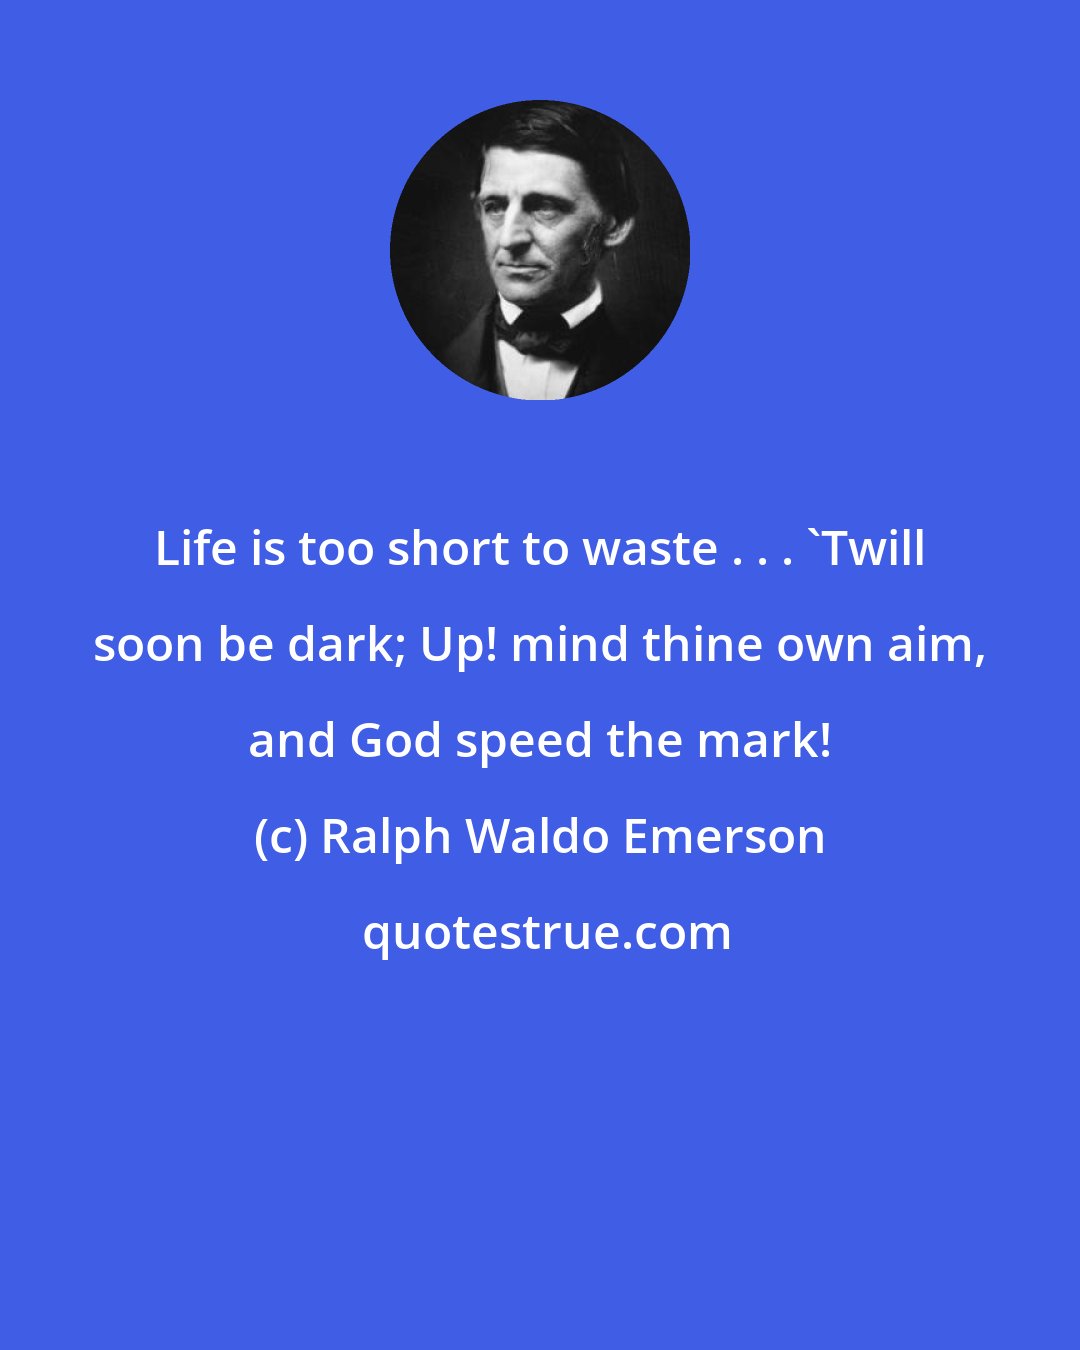 Ralph Waldo Emerson: Life is too short to waste . . . 'Twill soon be dark; Up! mind thine own aim, and God speed the mark!